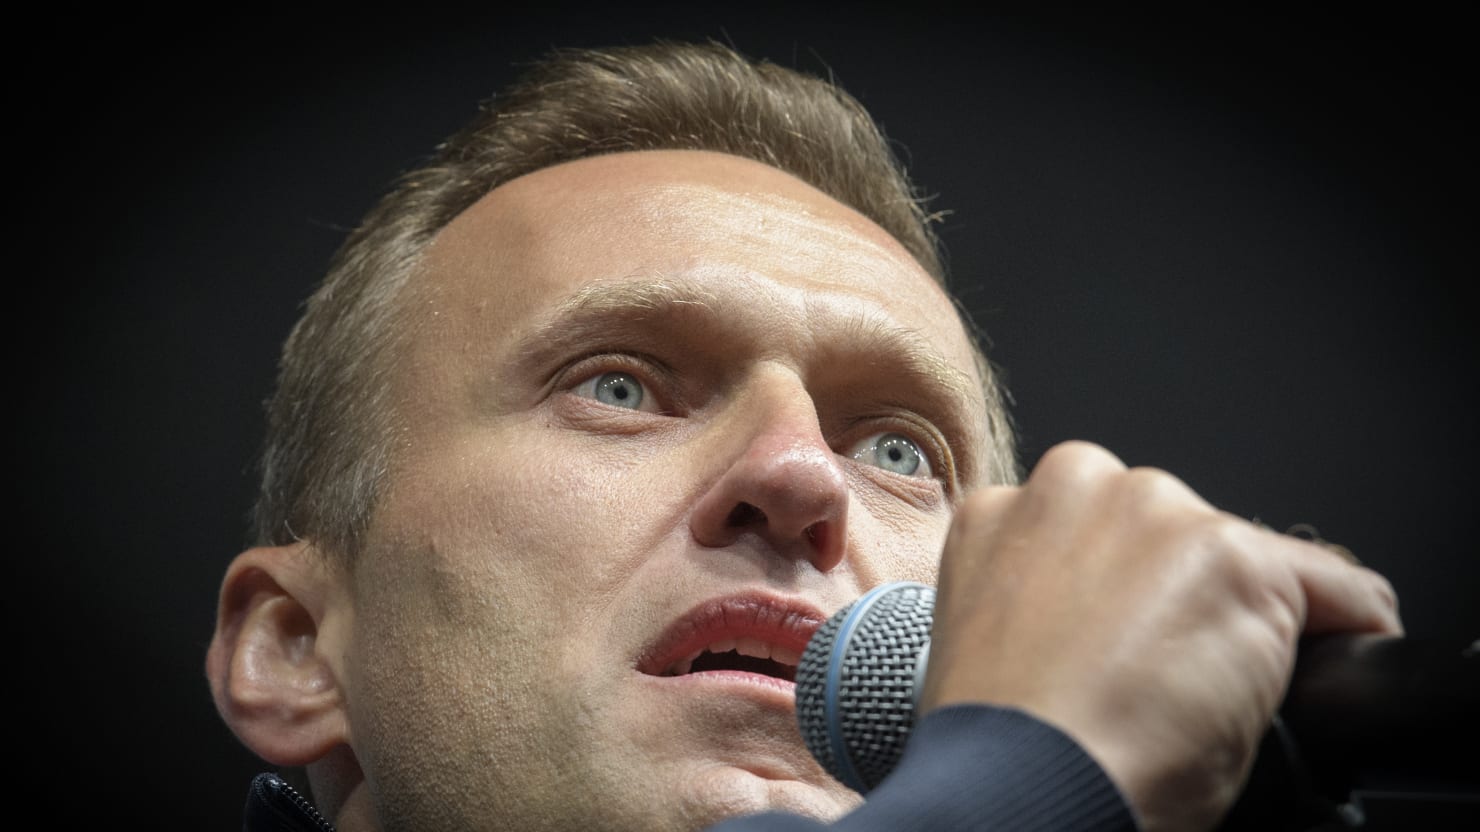 Putin Opponent Alexei Navalny Reportedly Poisoned by ‘Toxin’ in His Tea